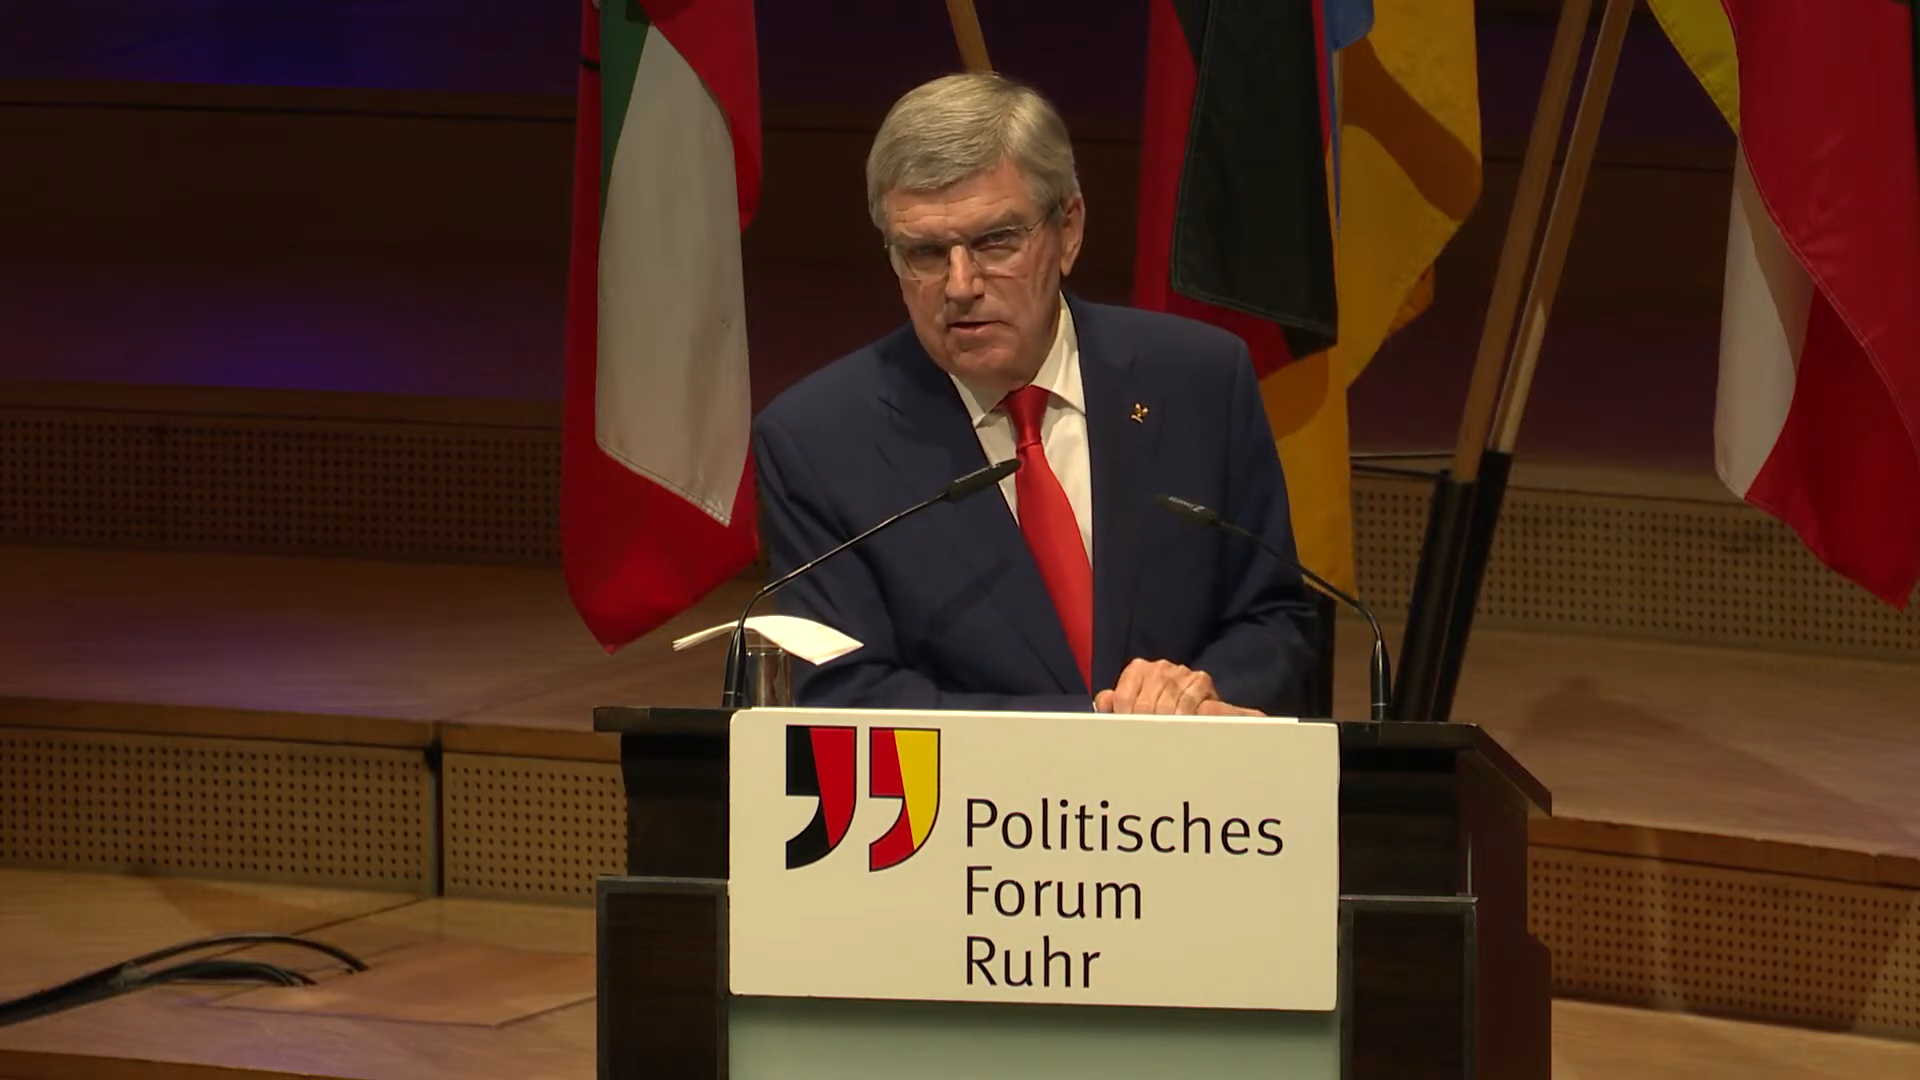 IOC President Thomas Bach insisted "we must be politically neutral but not apolitical" ©Ruhr Political Forum/YouTube